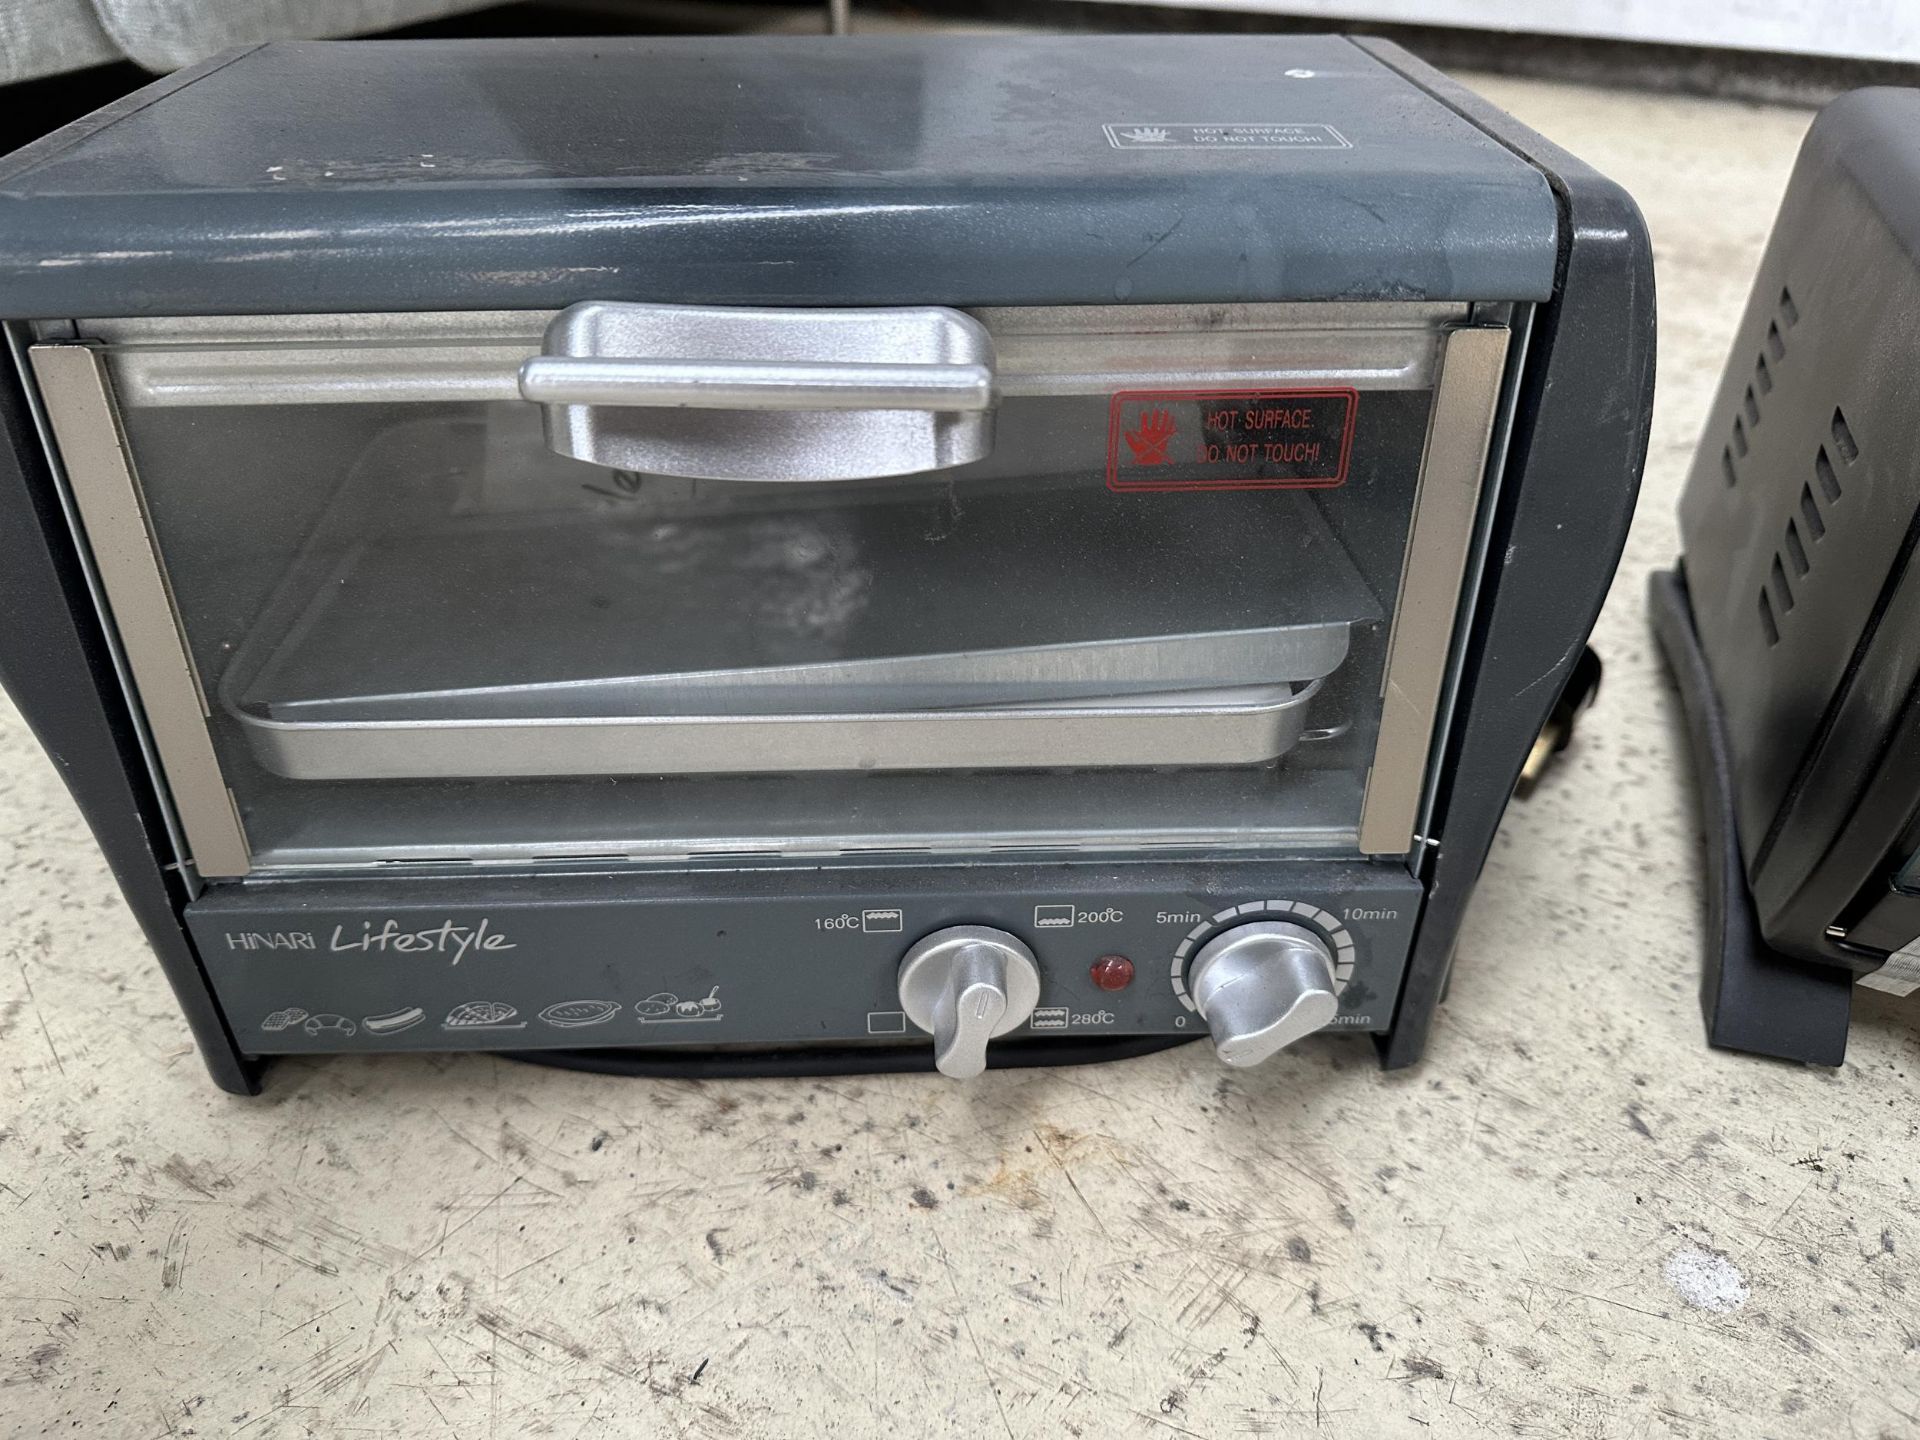 TWO COUNTER TOP MINI OVEN AND GRILLS - BELIEVED UNUSED - Bild 3 aus 4